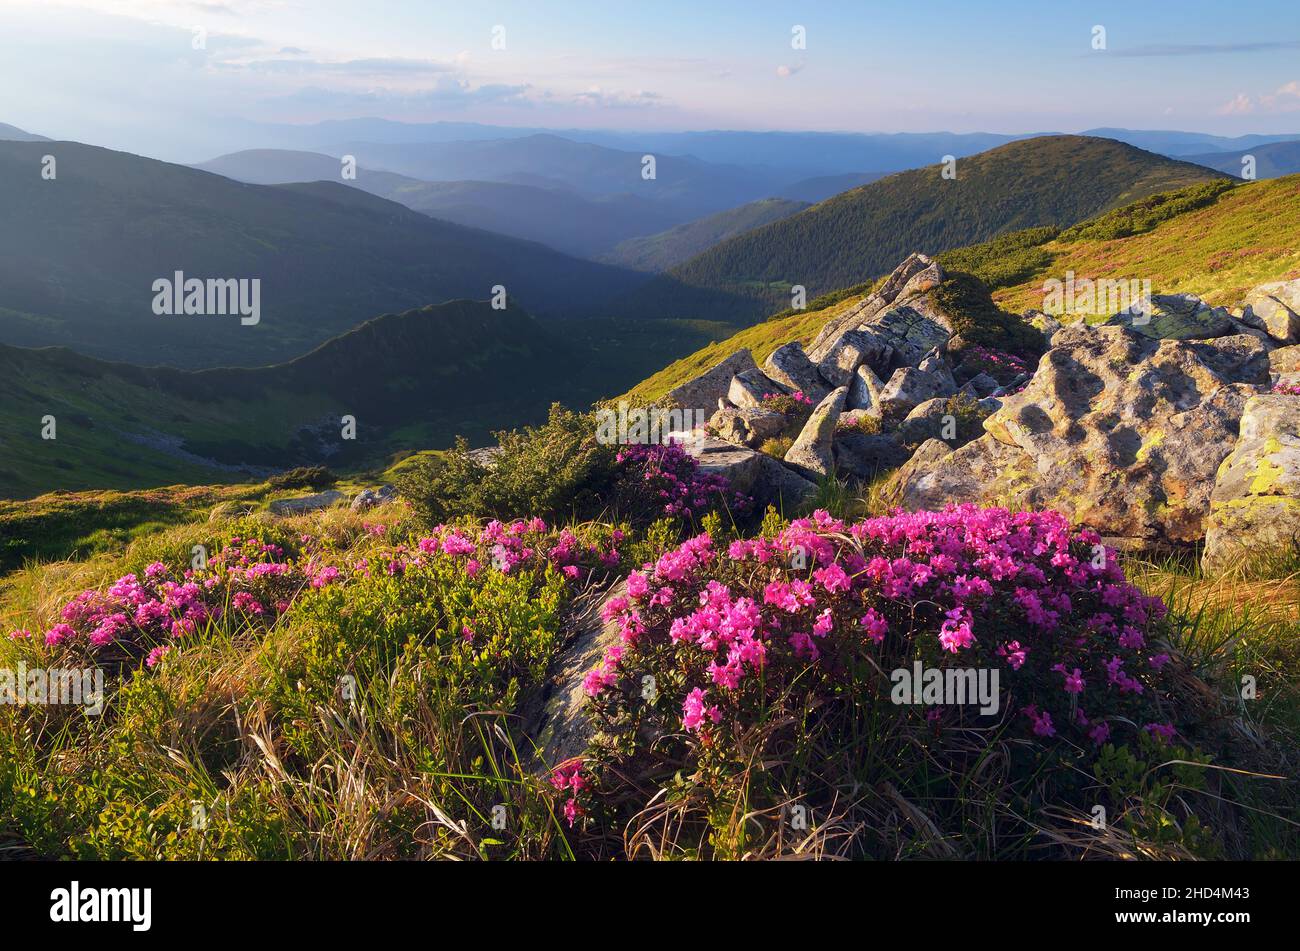 Rhododendron bush flowers in the mountains. Sunny summer evening. Carpathian mountains, Ukraine, Europe Stock Photo